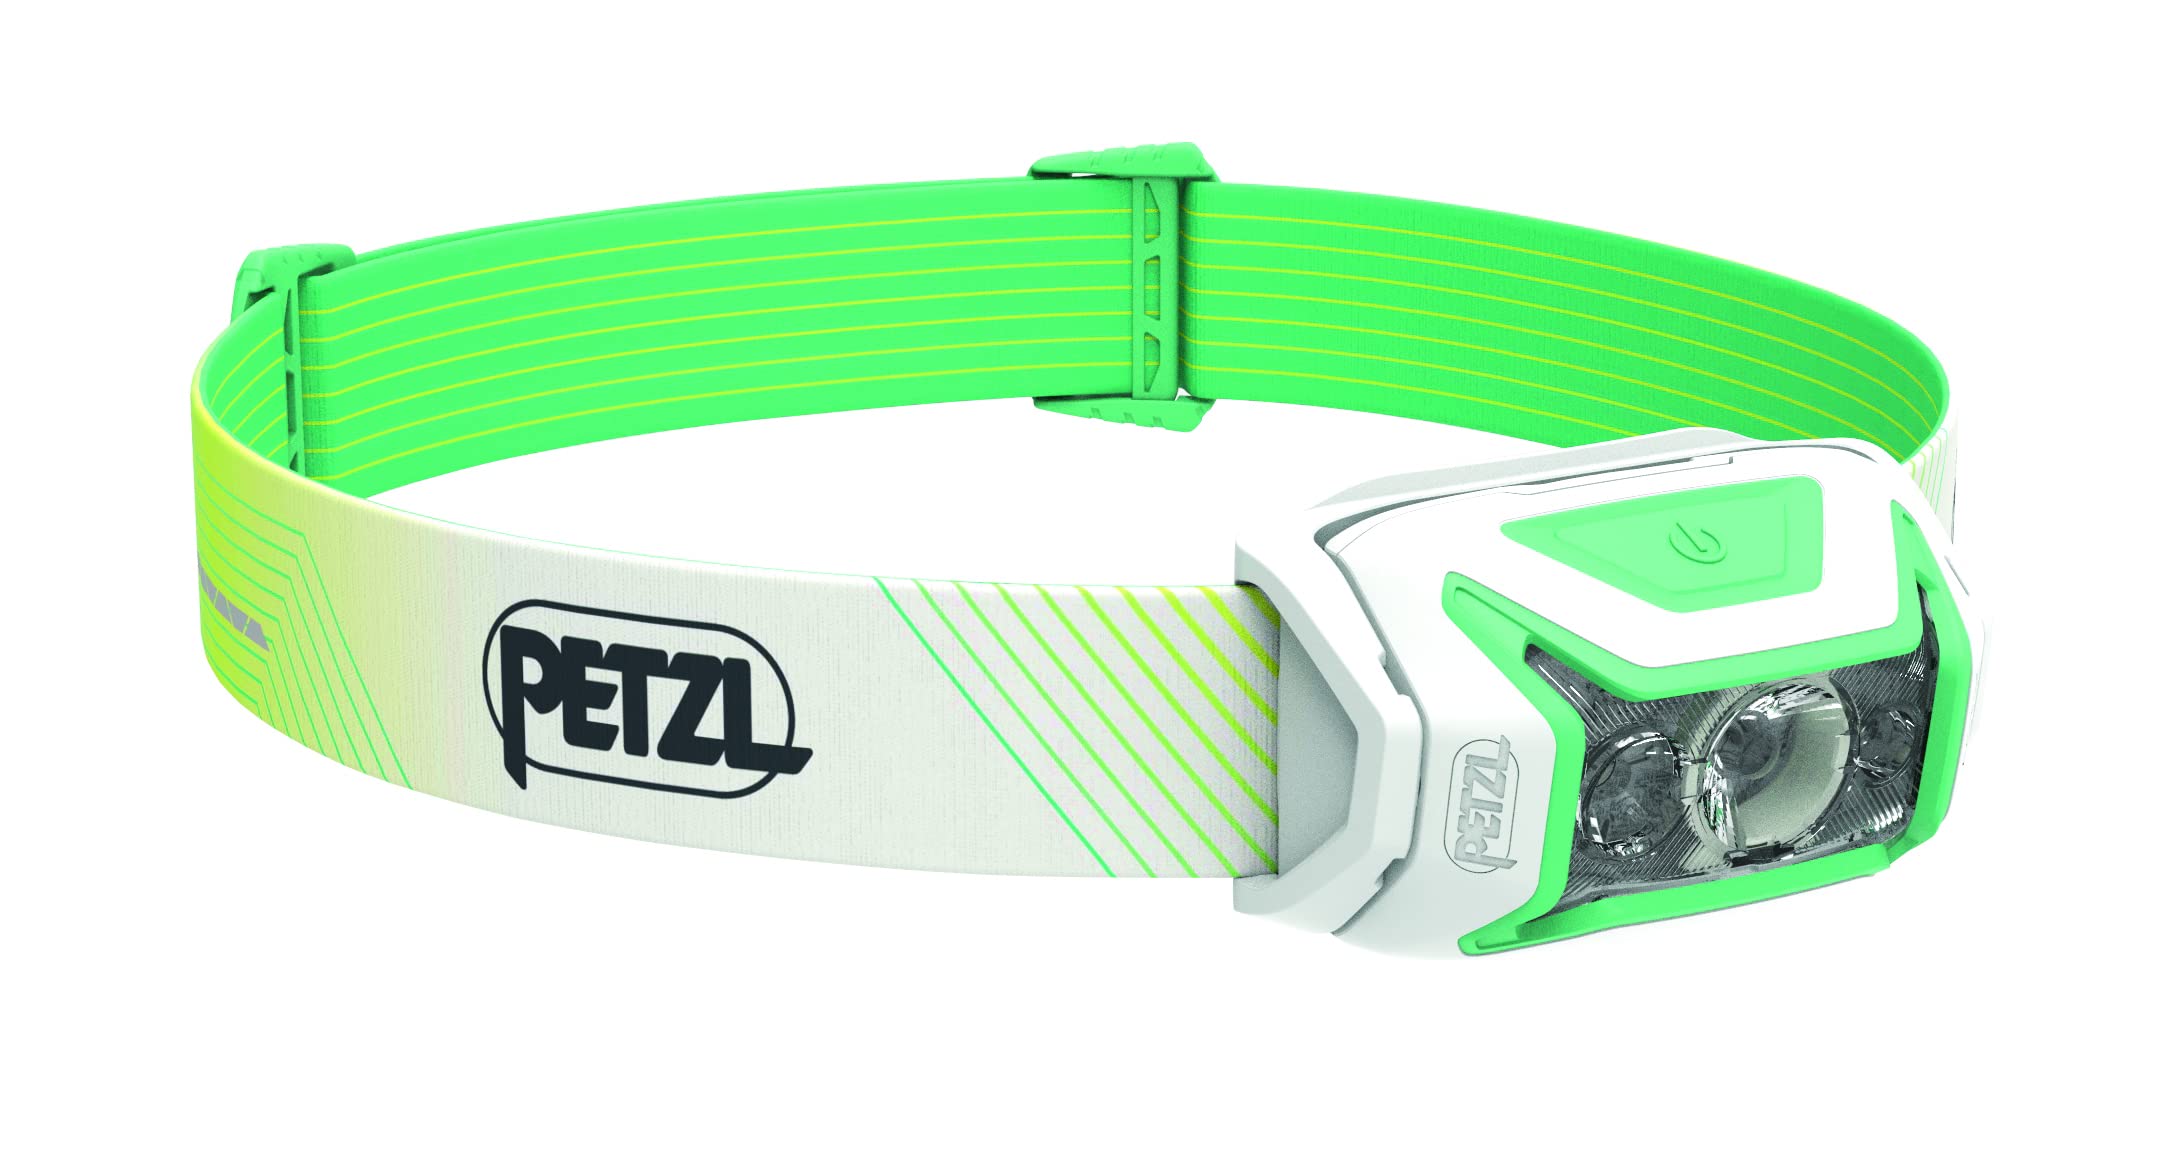 Petzl AcTIK cORE Headlamp - Powerful, Rechargeable 600 Lumen Light with Red Lighting for Hiking, climbing, and camping - green